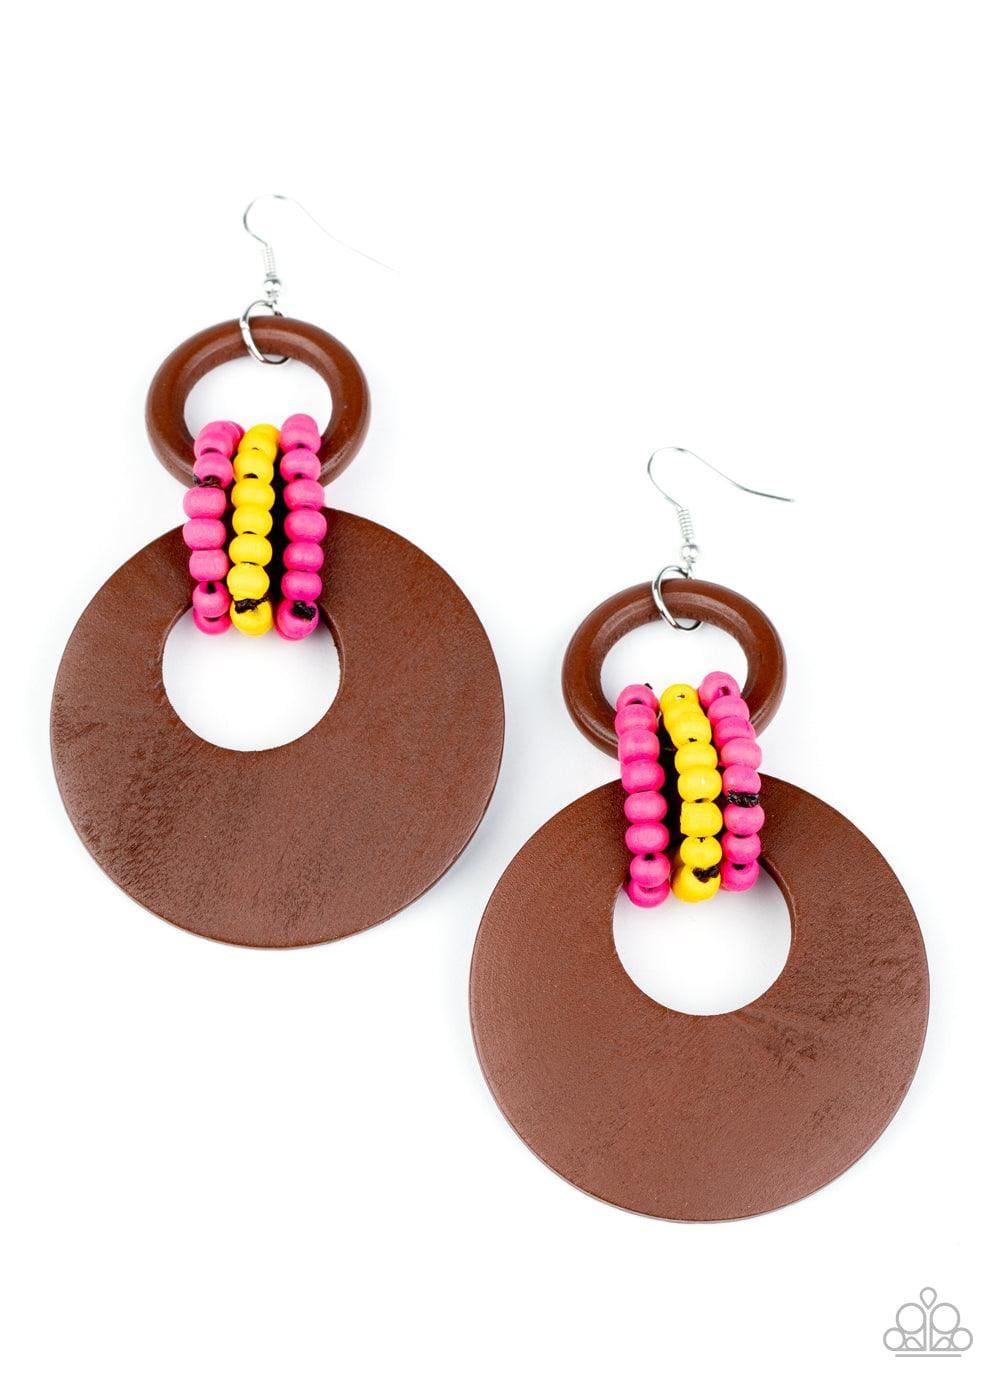 Paparazzi Accessories - Beach Day Drama - Multicolor Earrings - Bling by JessieK